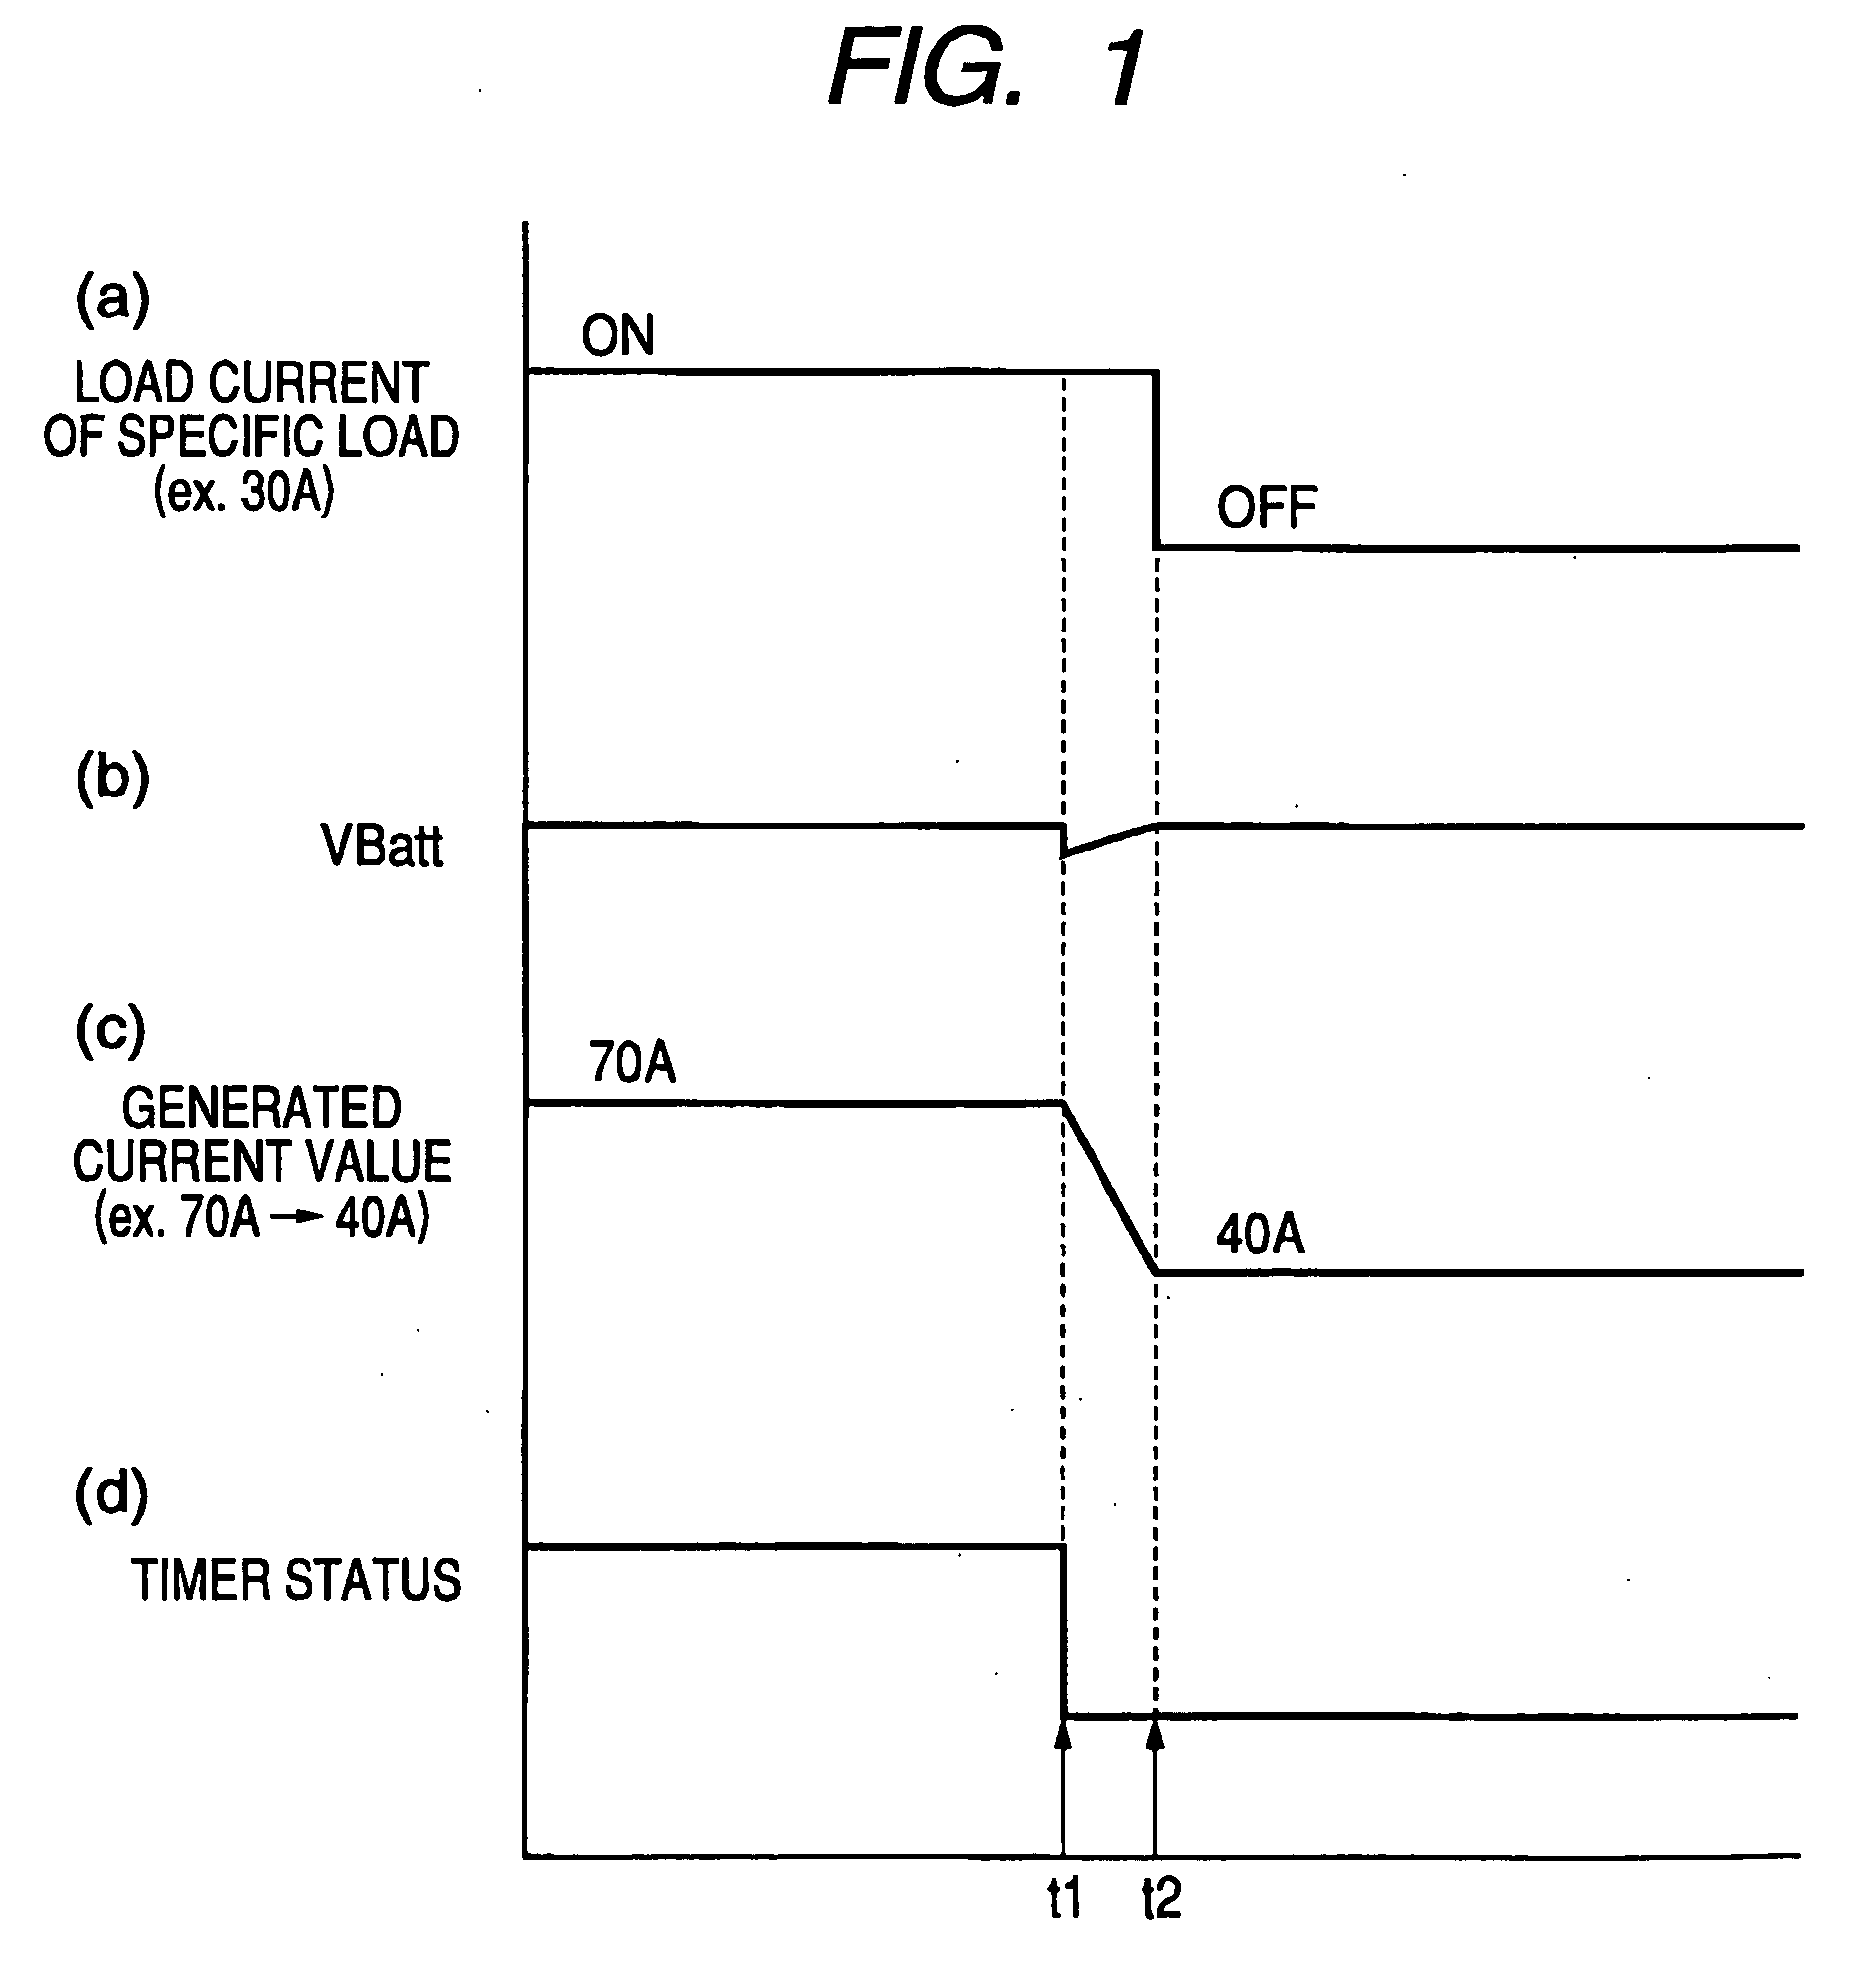 Vehicle-mounted electrical generator control system enabling suppression of supply voltage spikes that result from disconnecting electrical loads